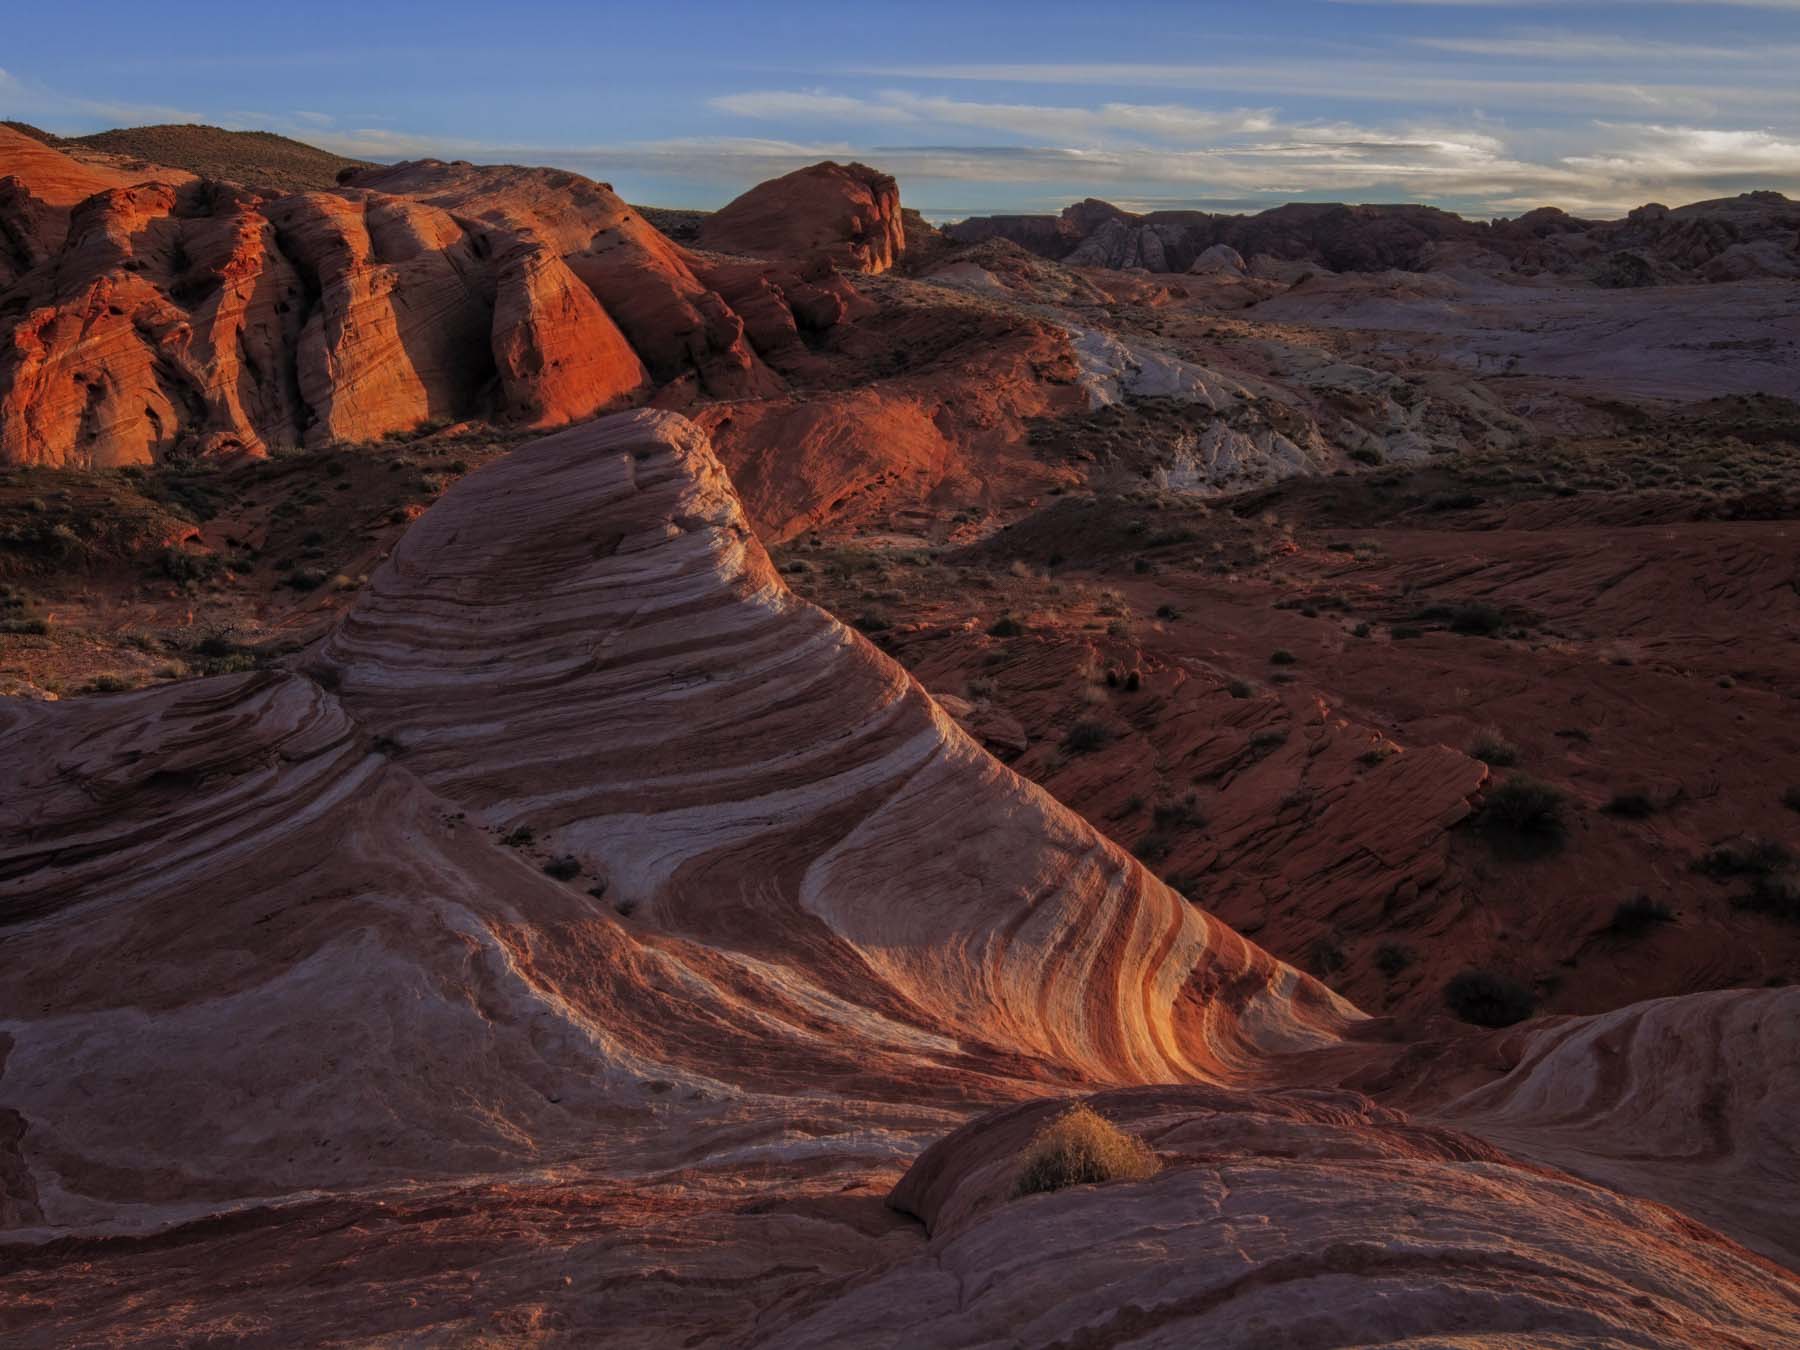 The Fire Wave in Valley of Fire State Park, Nevada